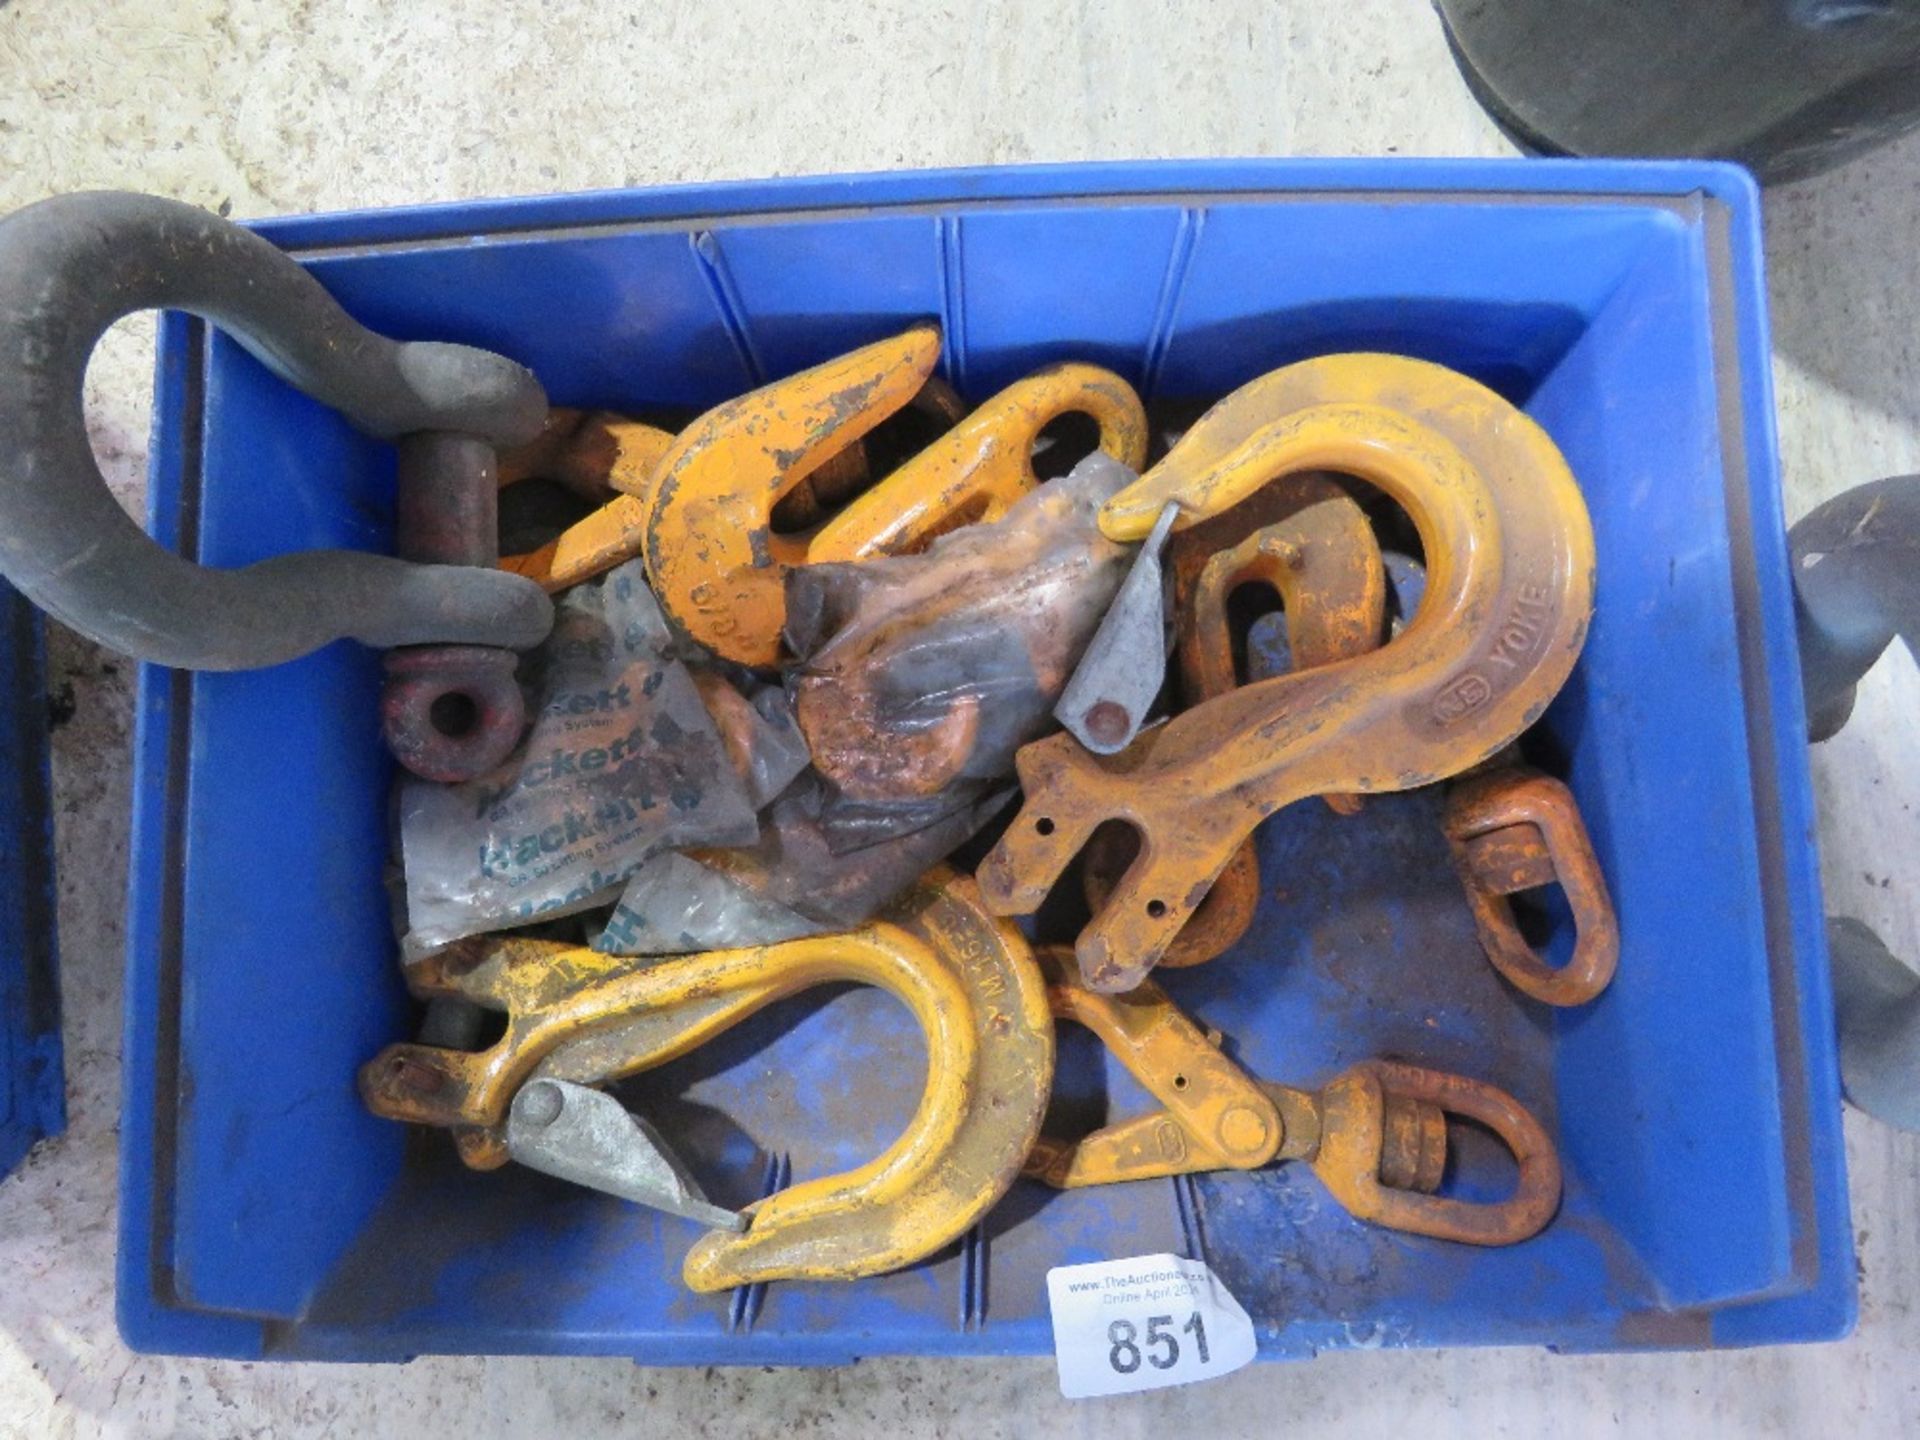 TRAY CONTAINING LARGE SHACKLES AND LIFTING HOOKS. - Image 2 of 3